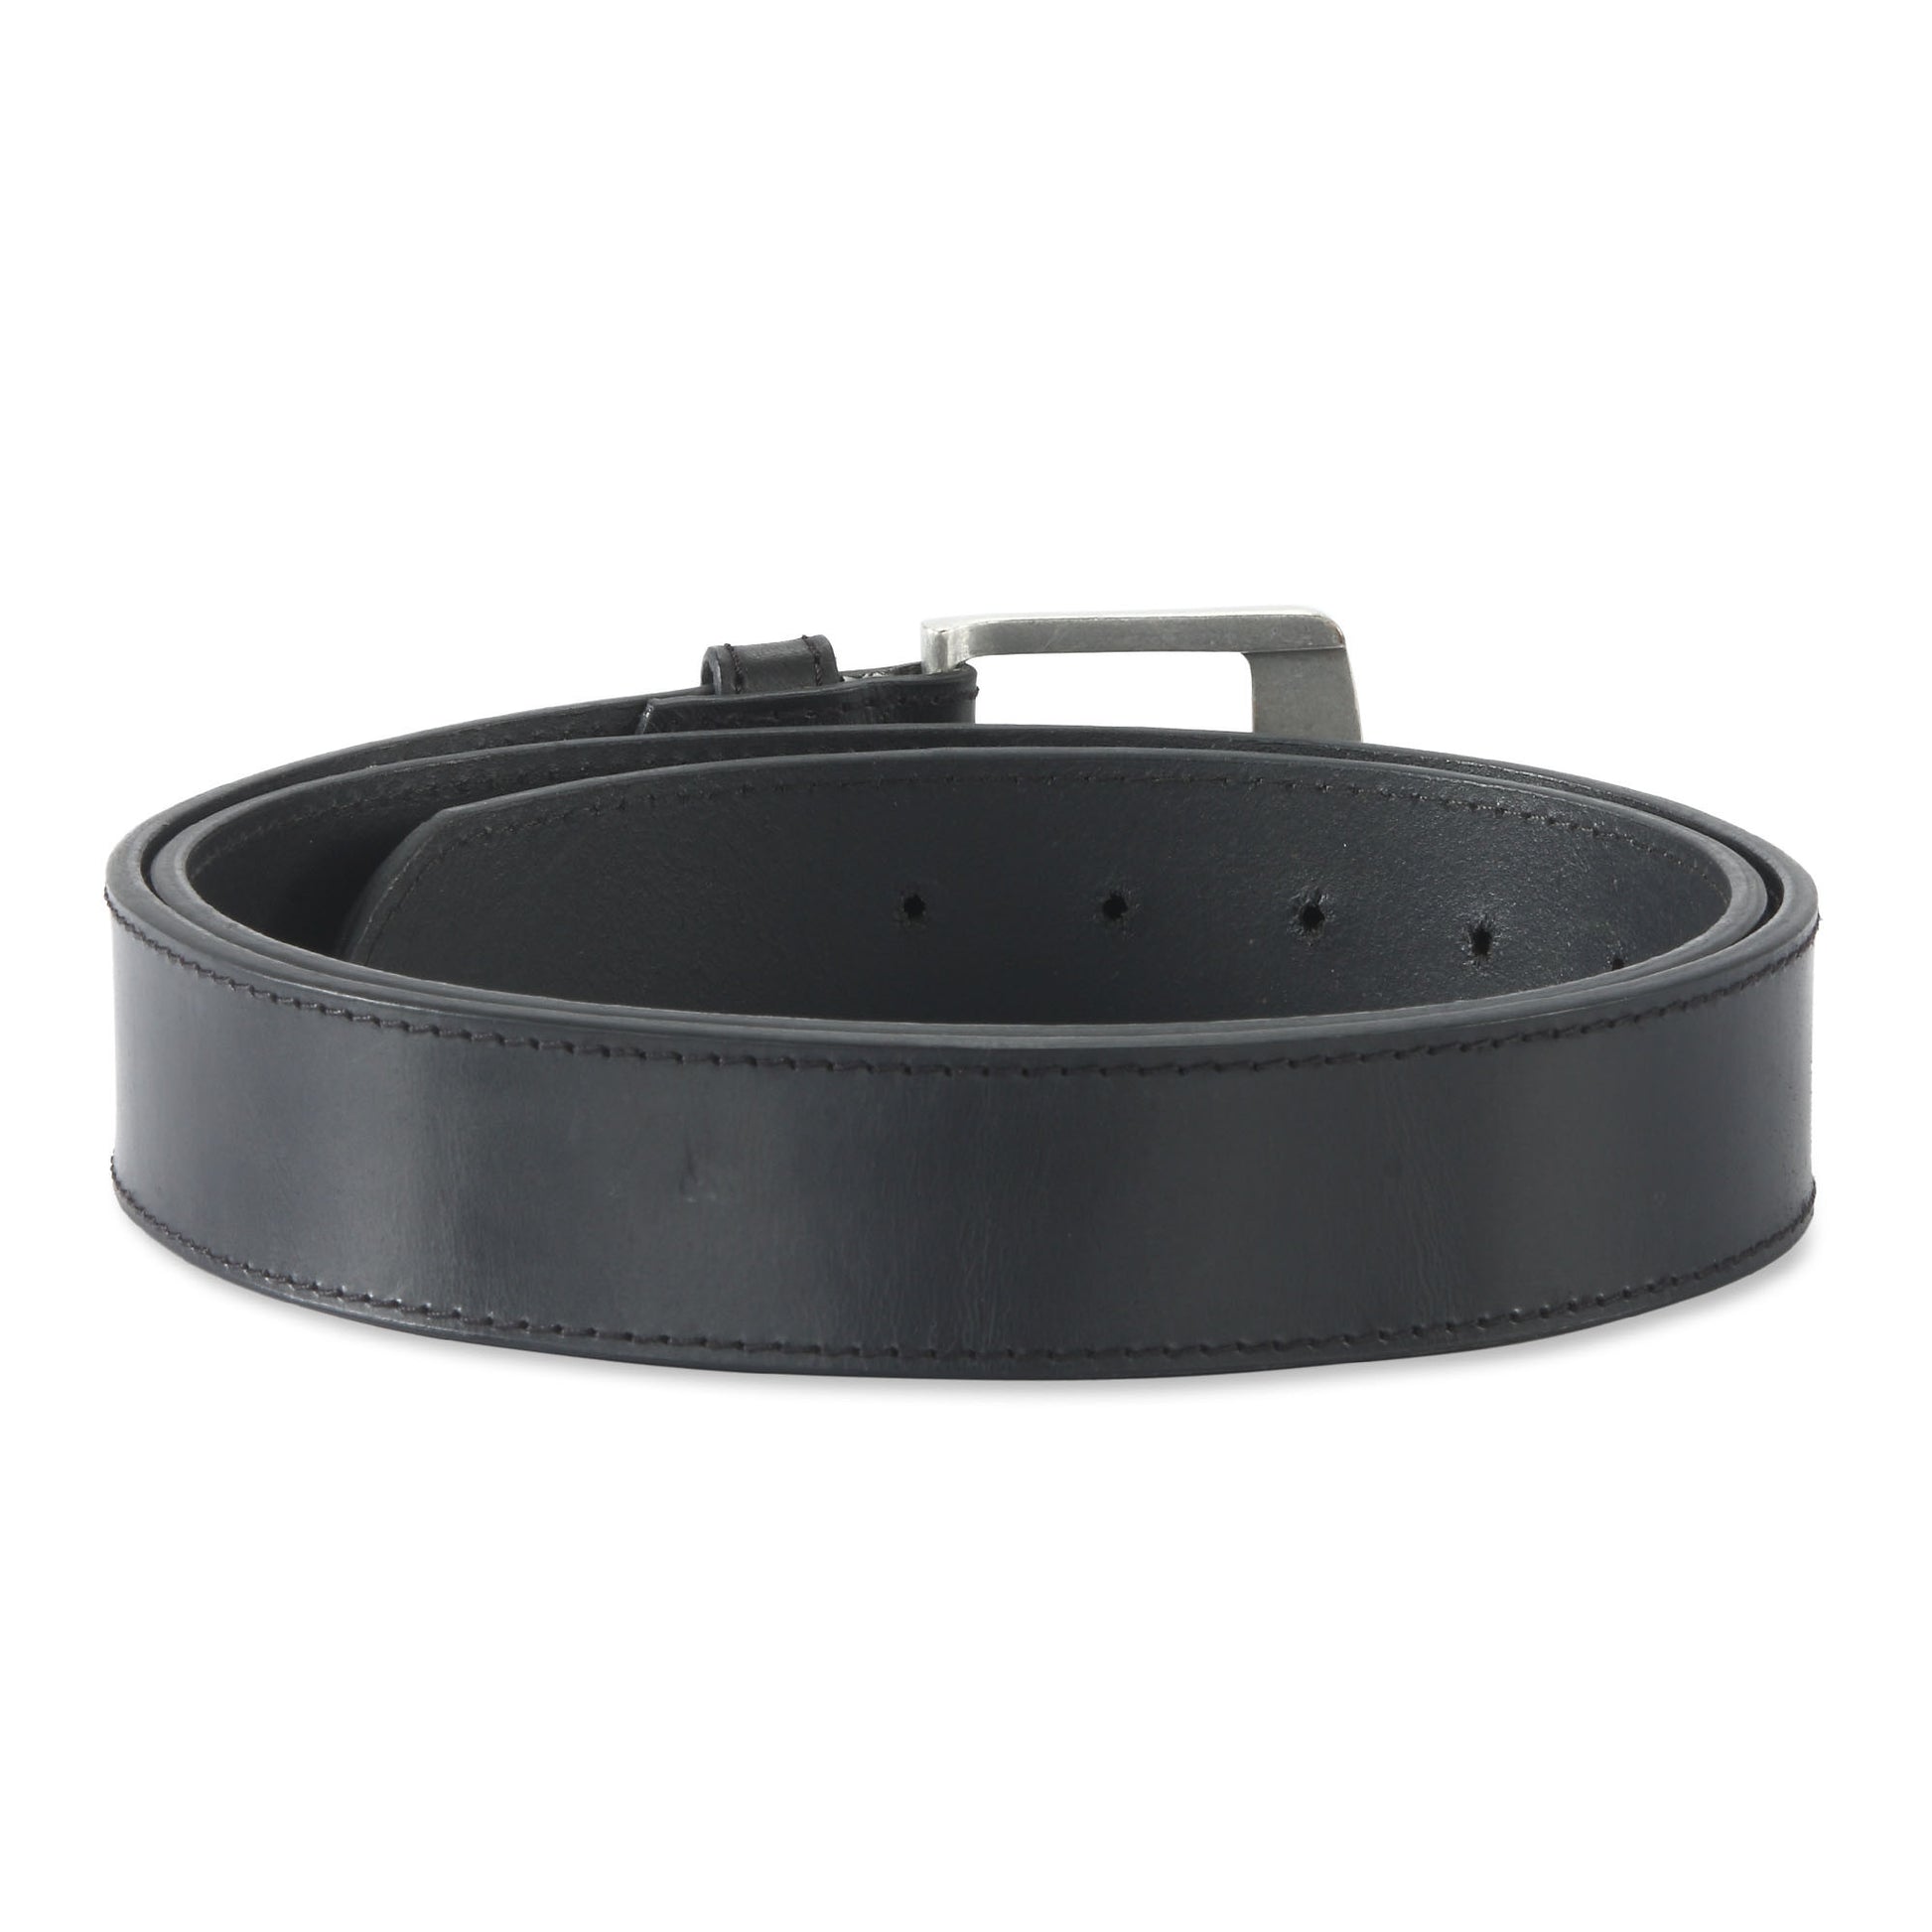 392701 - one and a half inch wide leather belt in black color full grain leather - back view